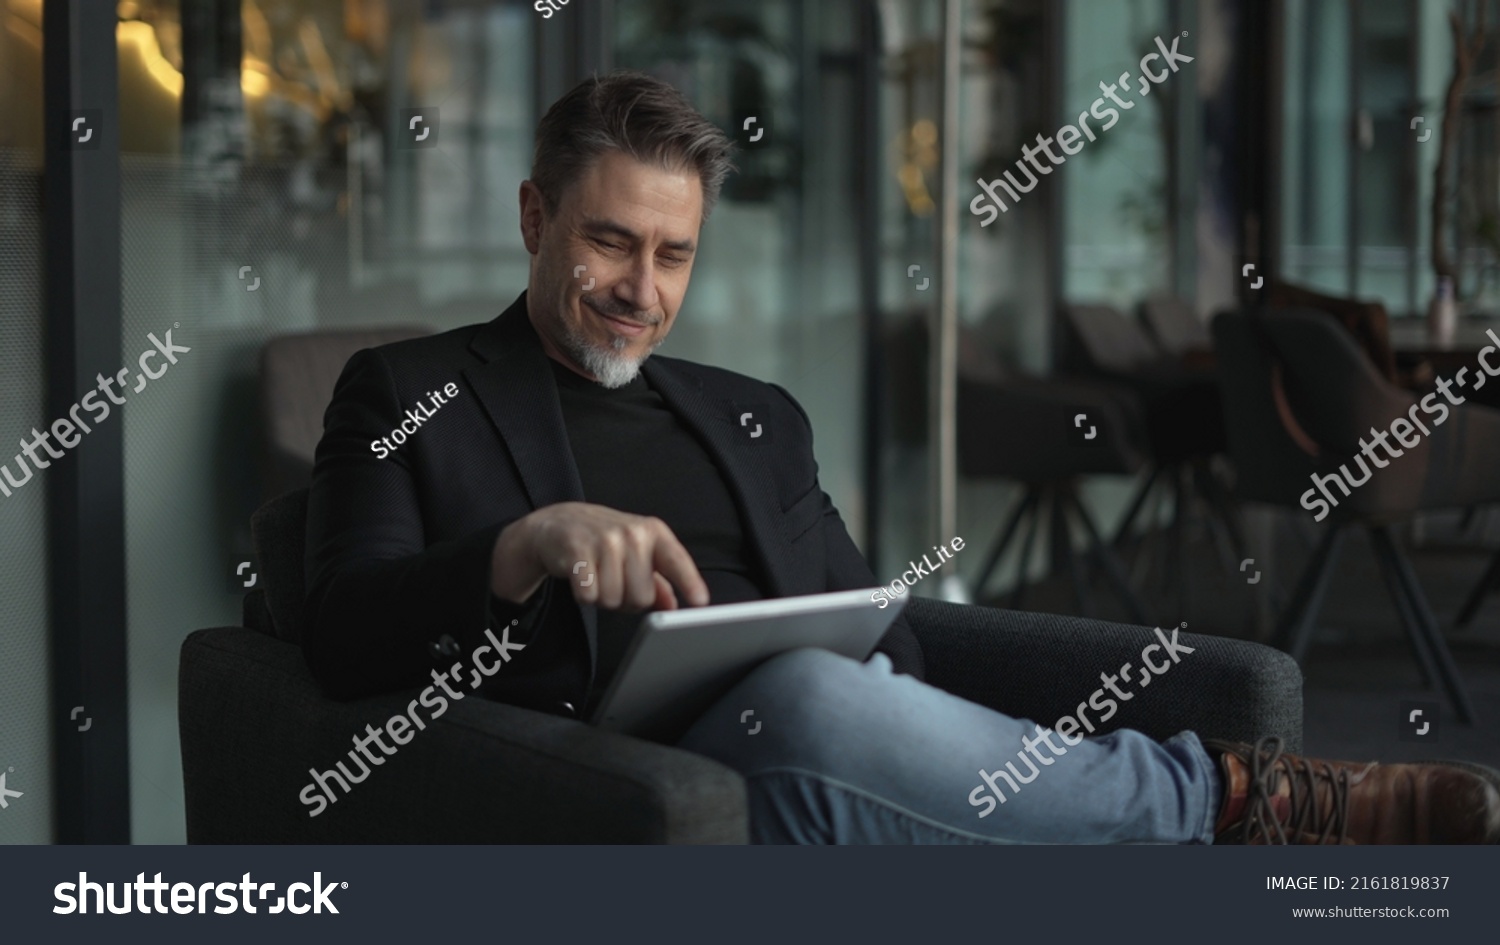 Businessman using tablet computer in office. Happy middle aged man in business casual, Entrepreneur working online, reading finance report, thinking. #2161819837